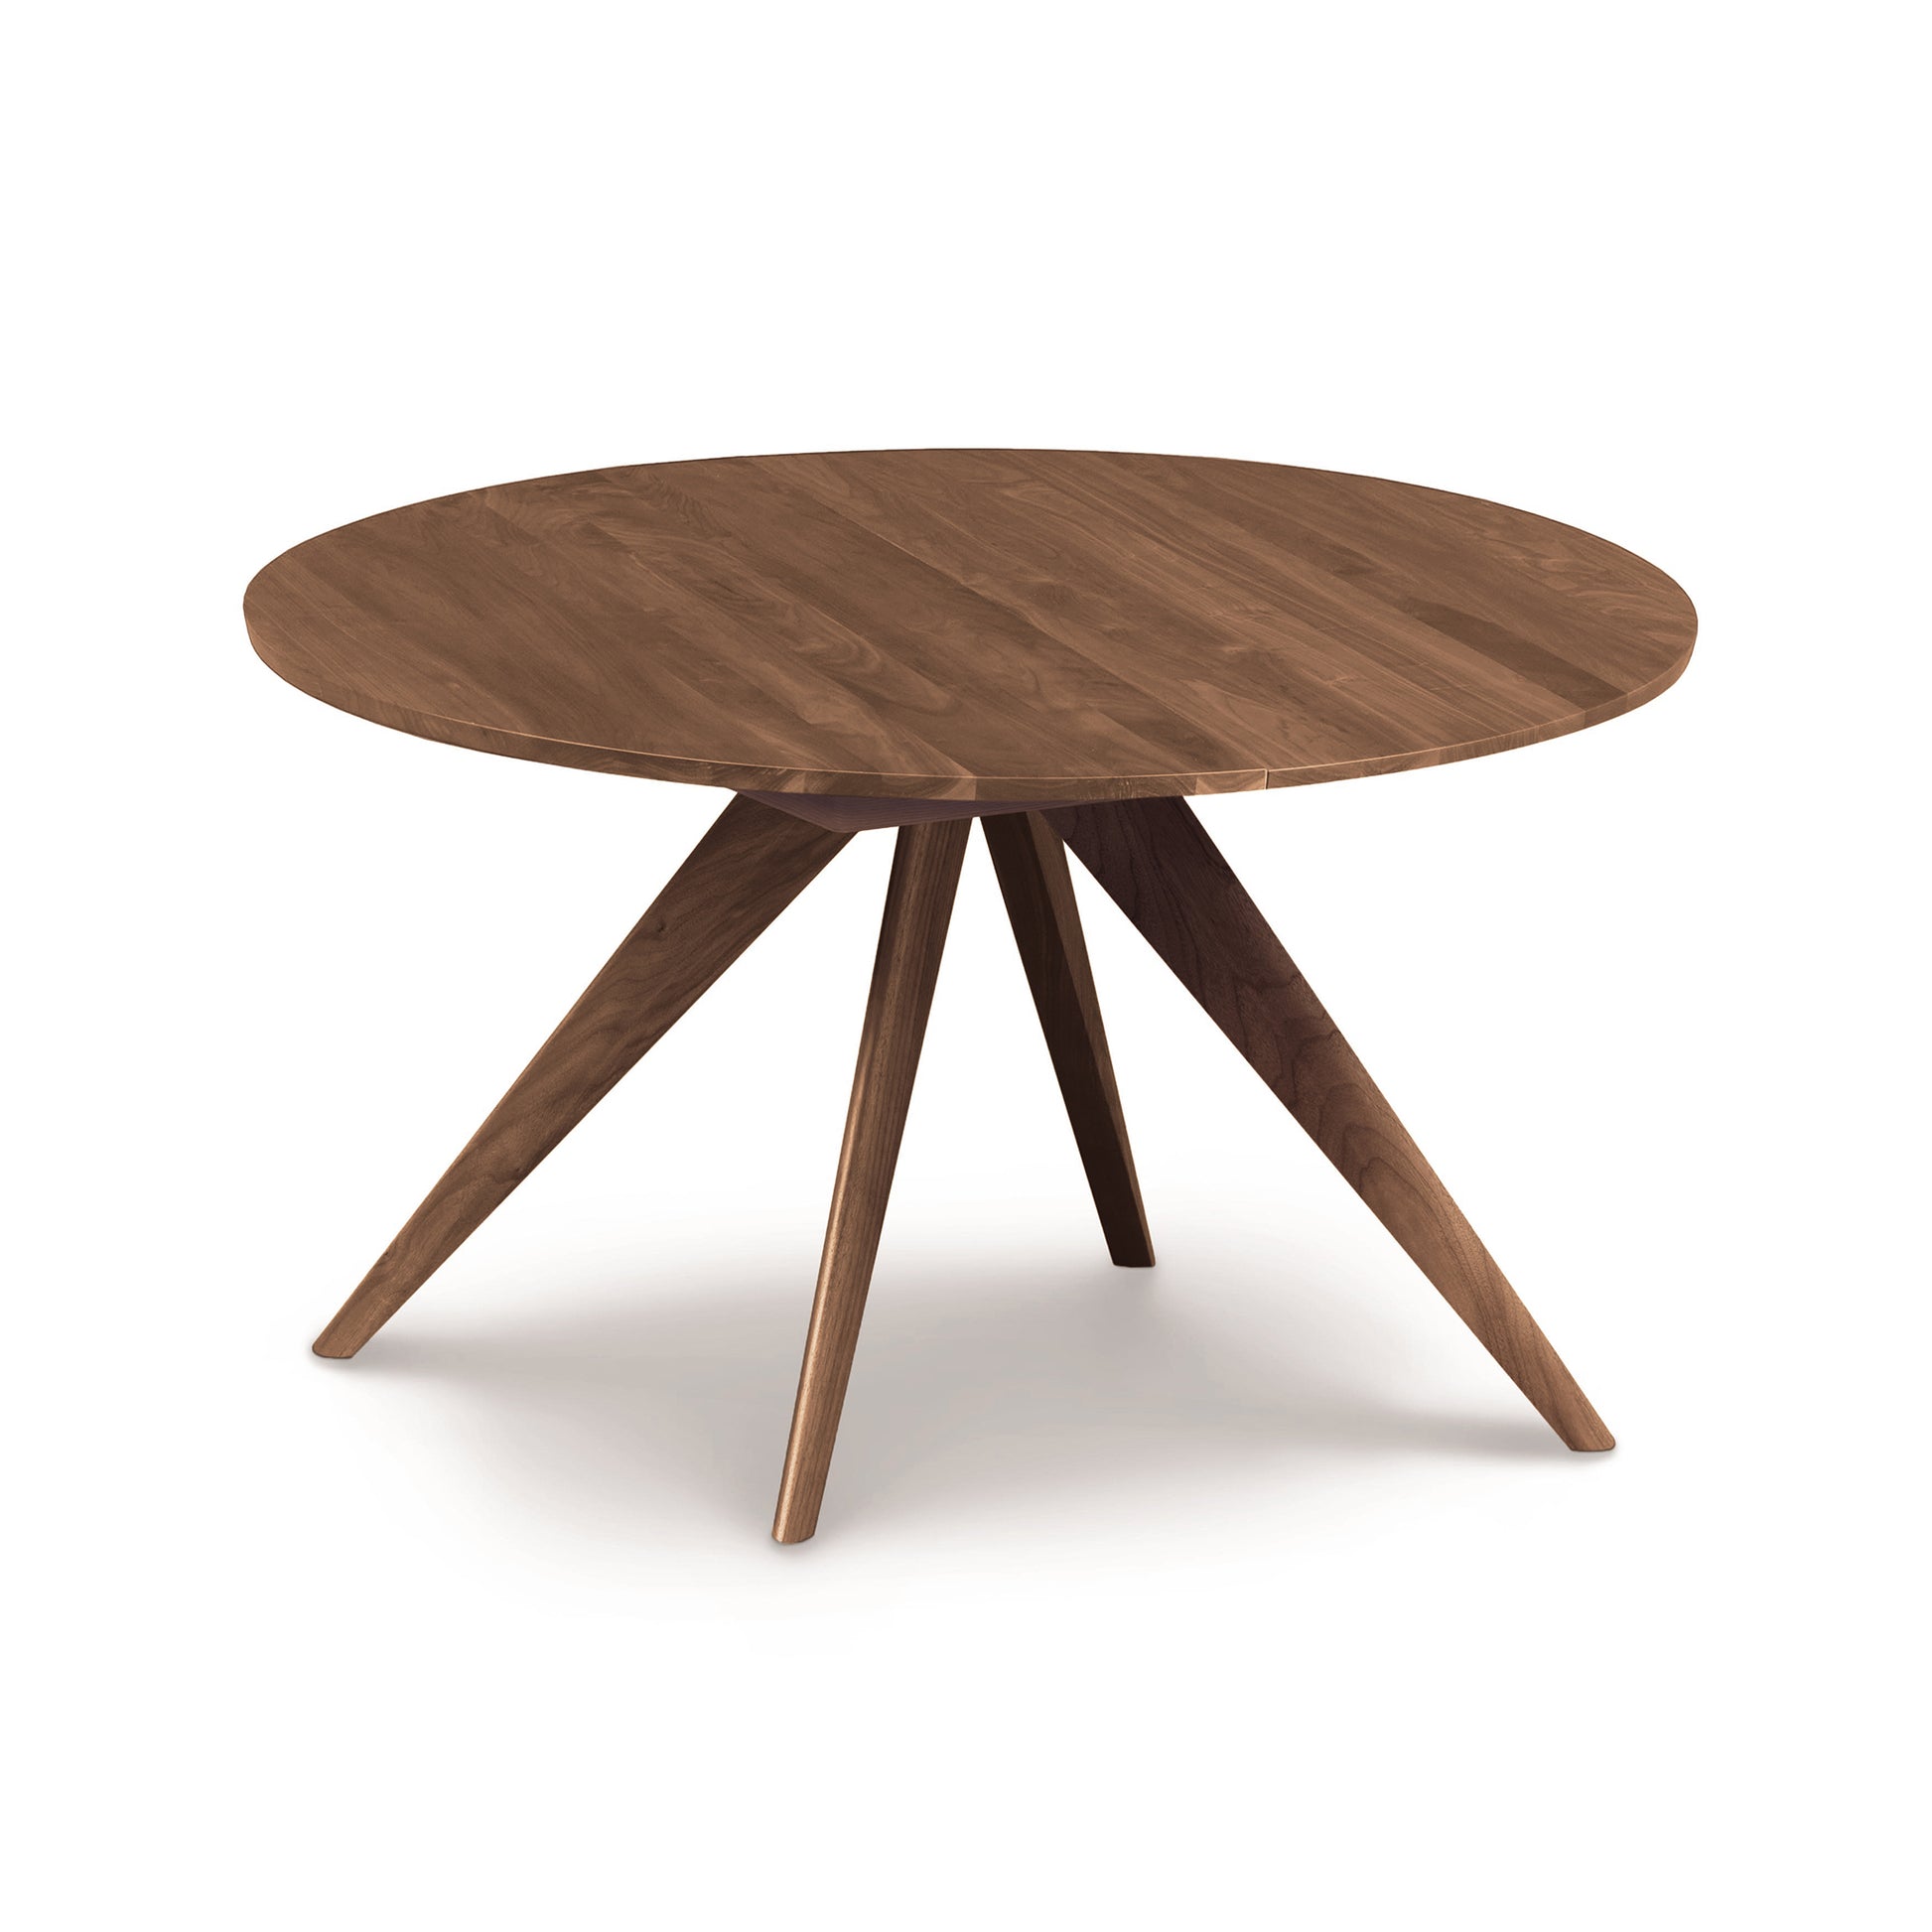 A solid North American wood Copeland Furniture Catalina Round Extension Table with four angled legs on a white background.